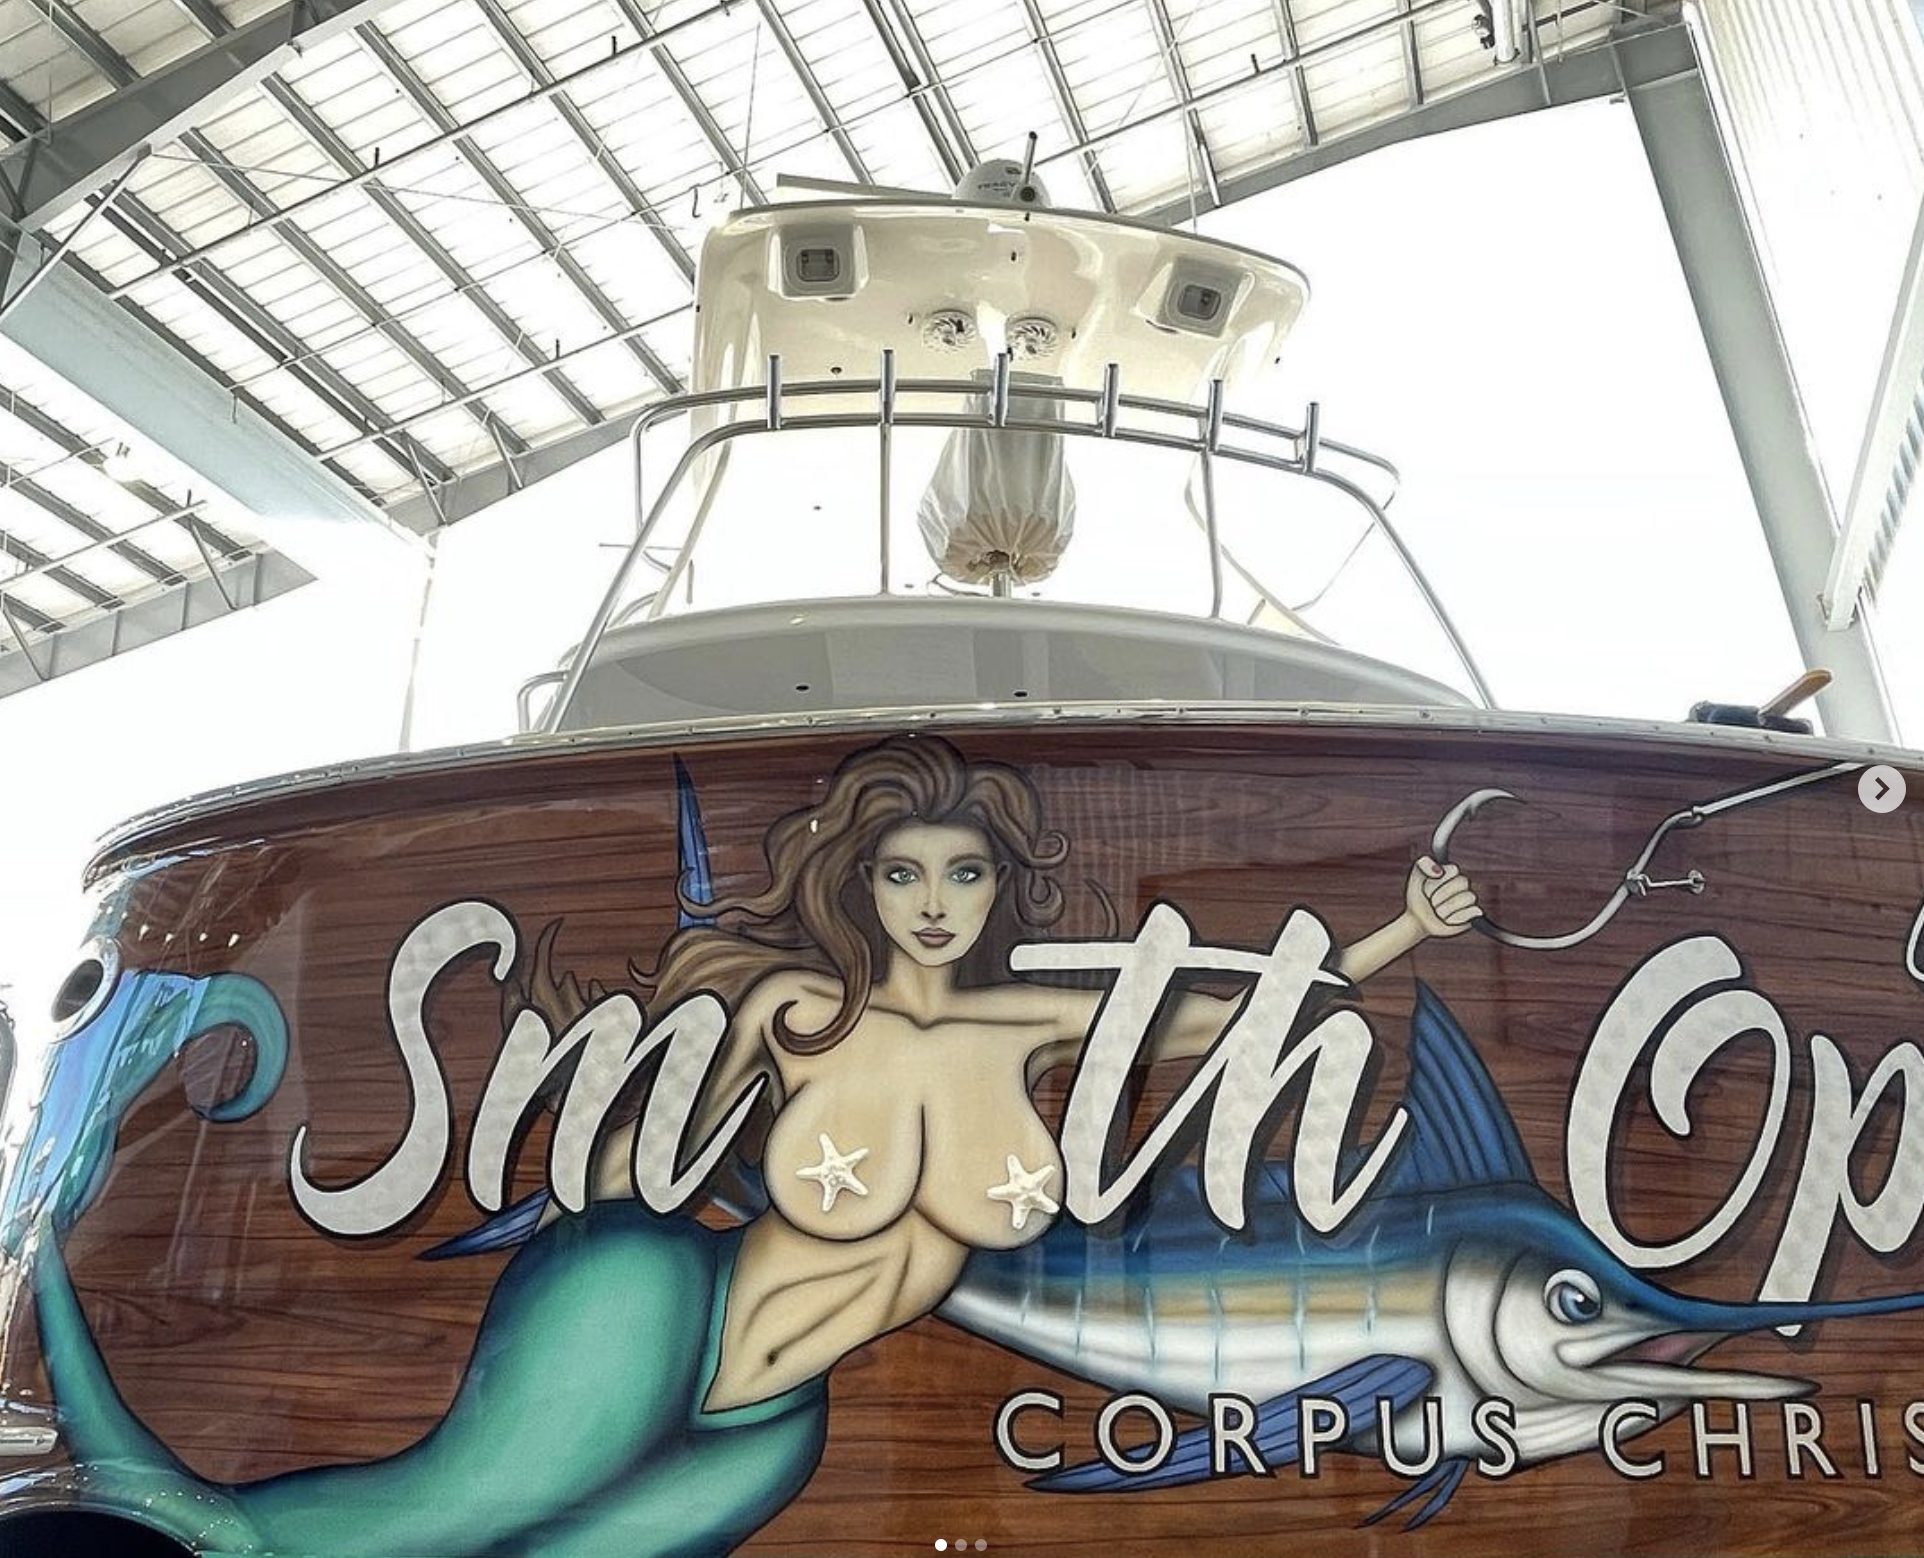 mermaid and lettering on back of boat, art by monique richter